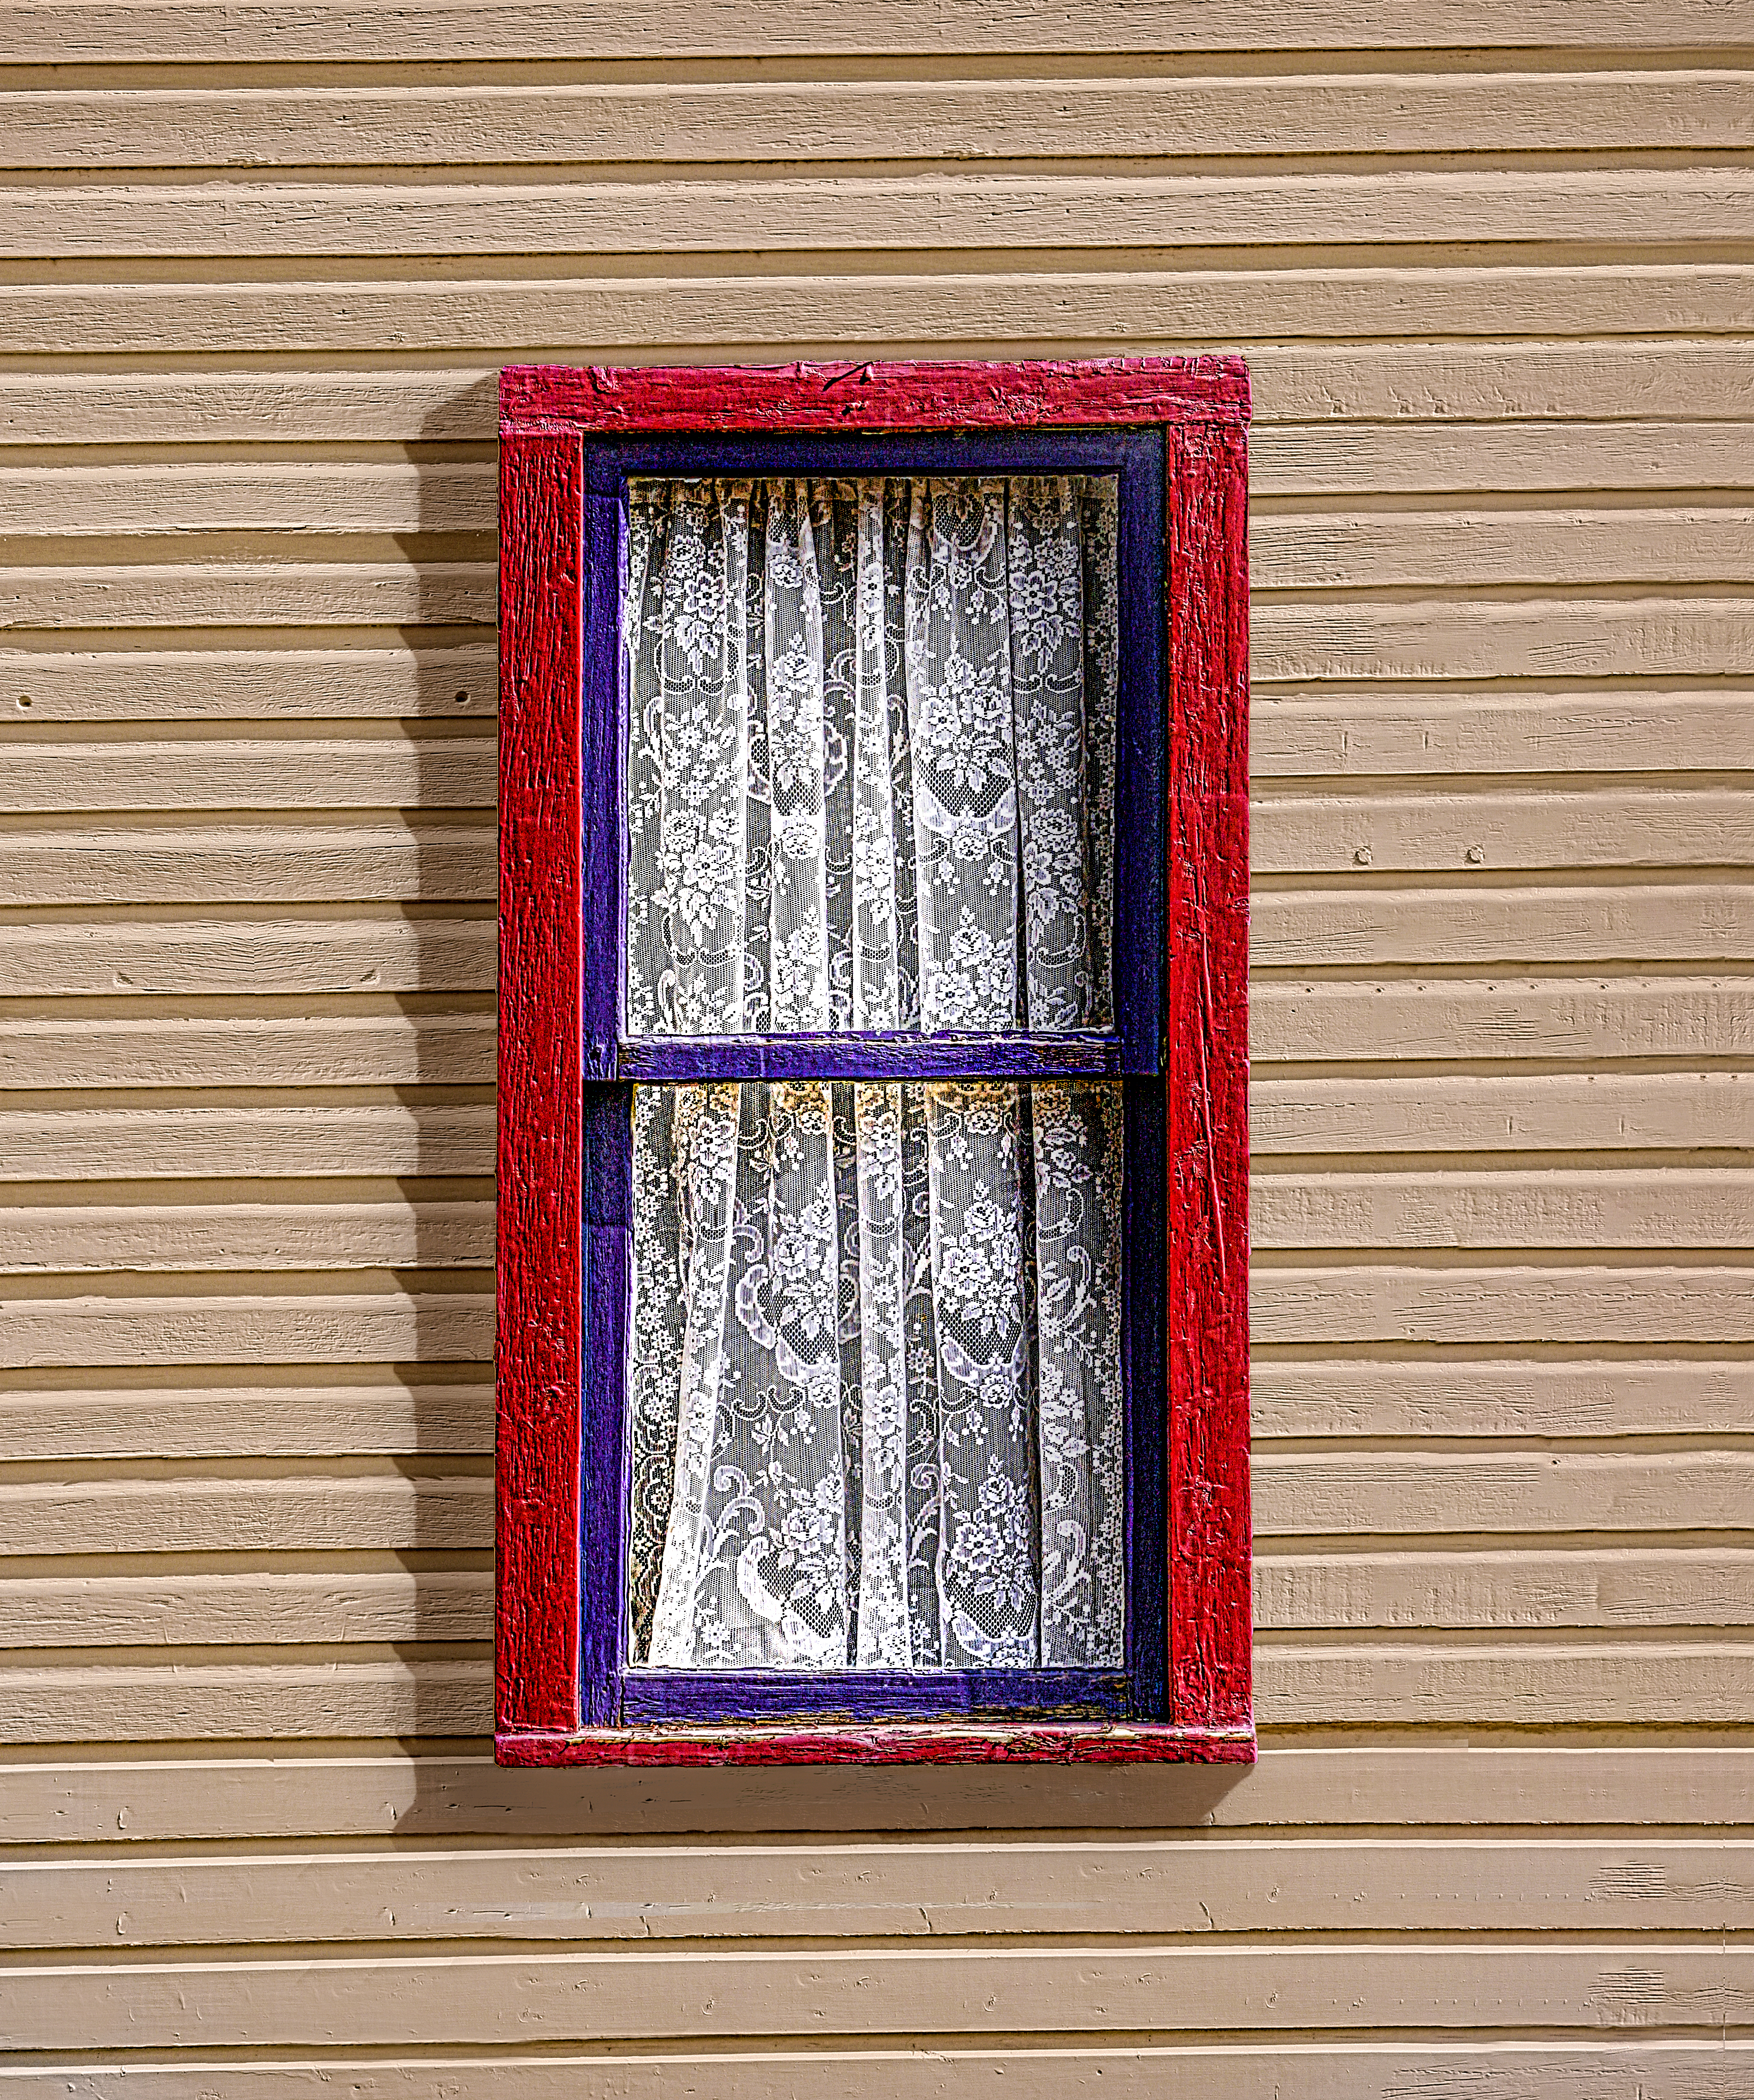 LACEY - Windows are often great photo subjects. Though simple, this one had it all... color, texture in the old siding and trim and of course, the lace.